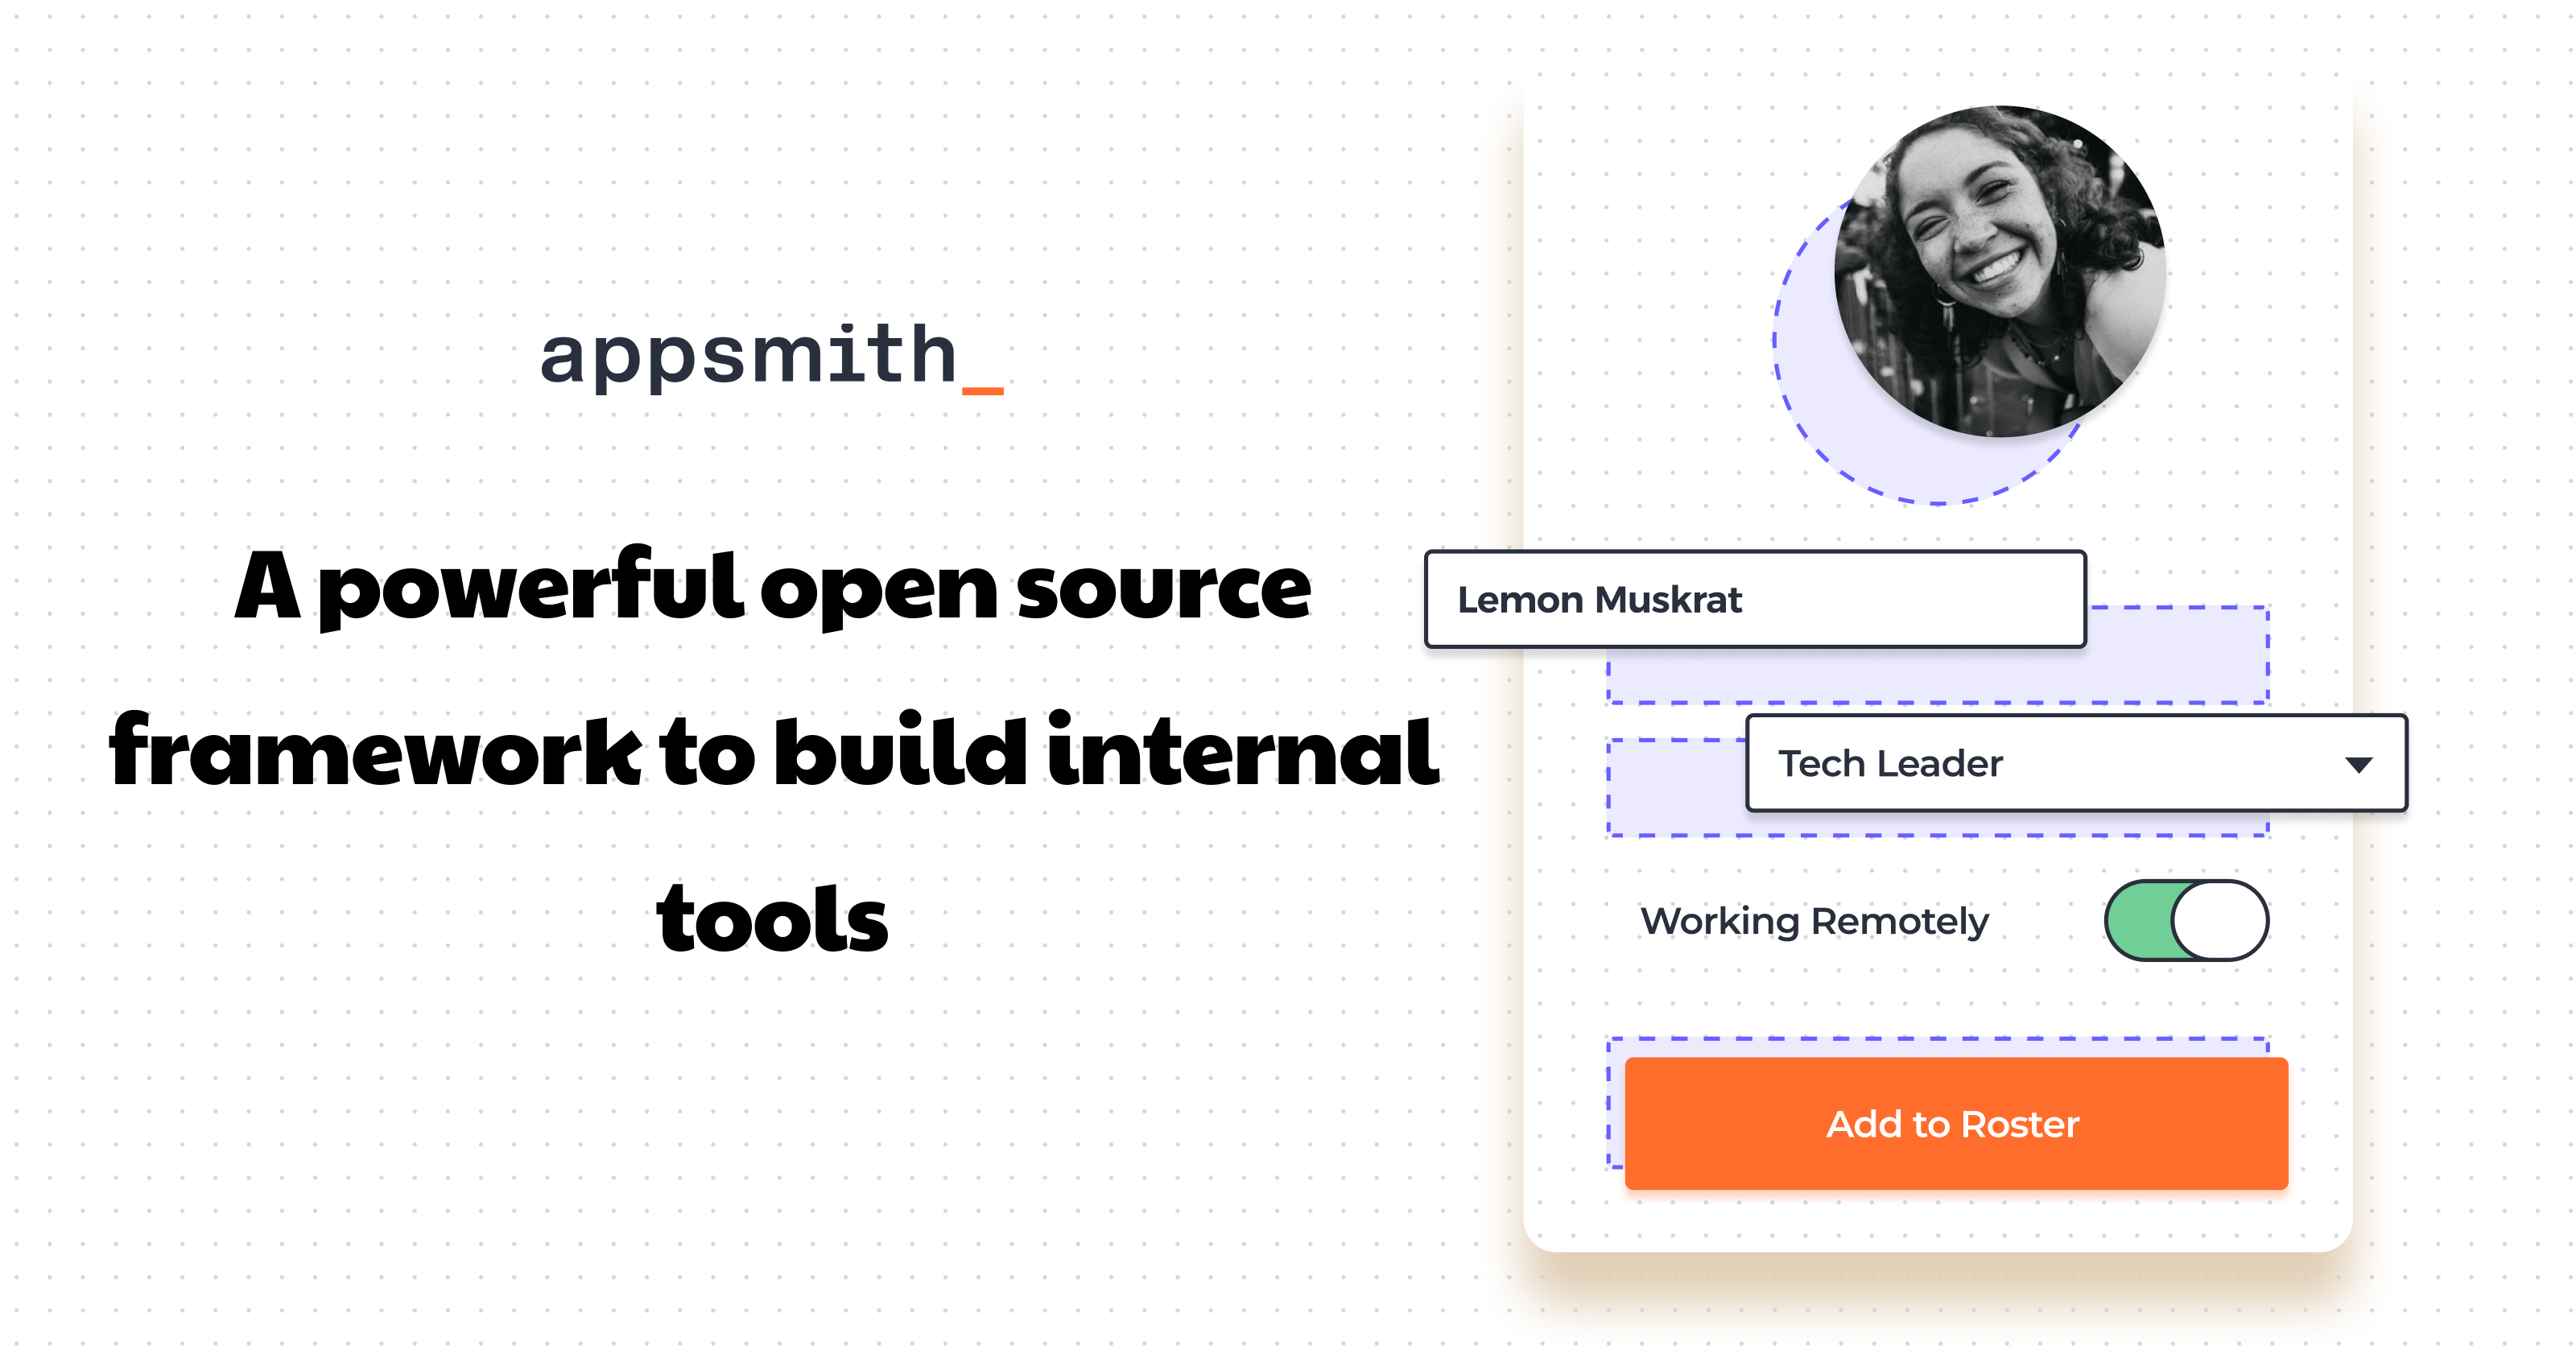 Appsmith - The Frontend Tool for Any Backend